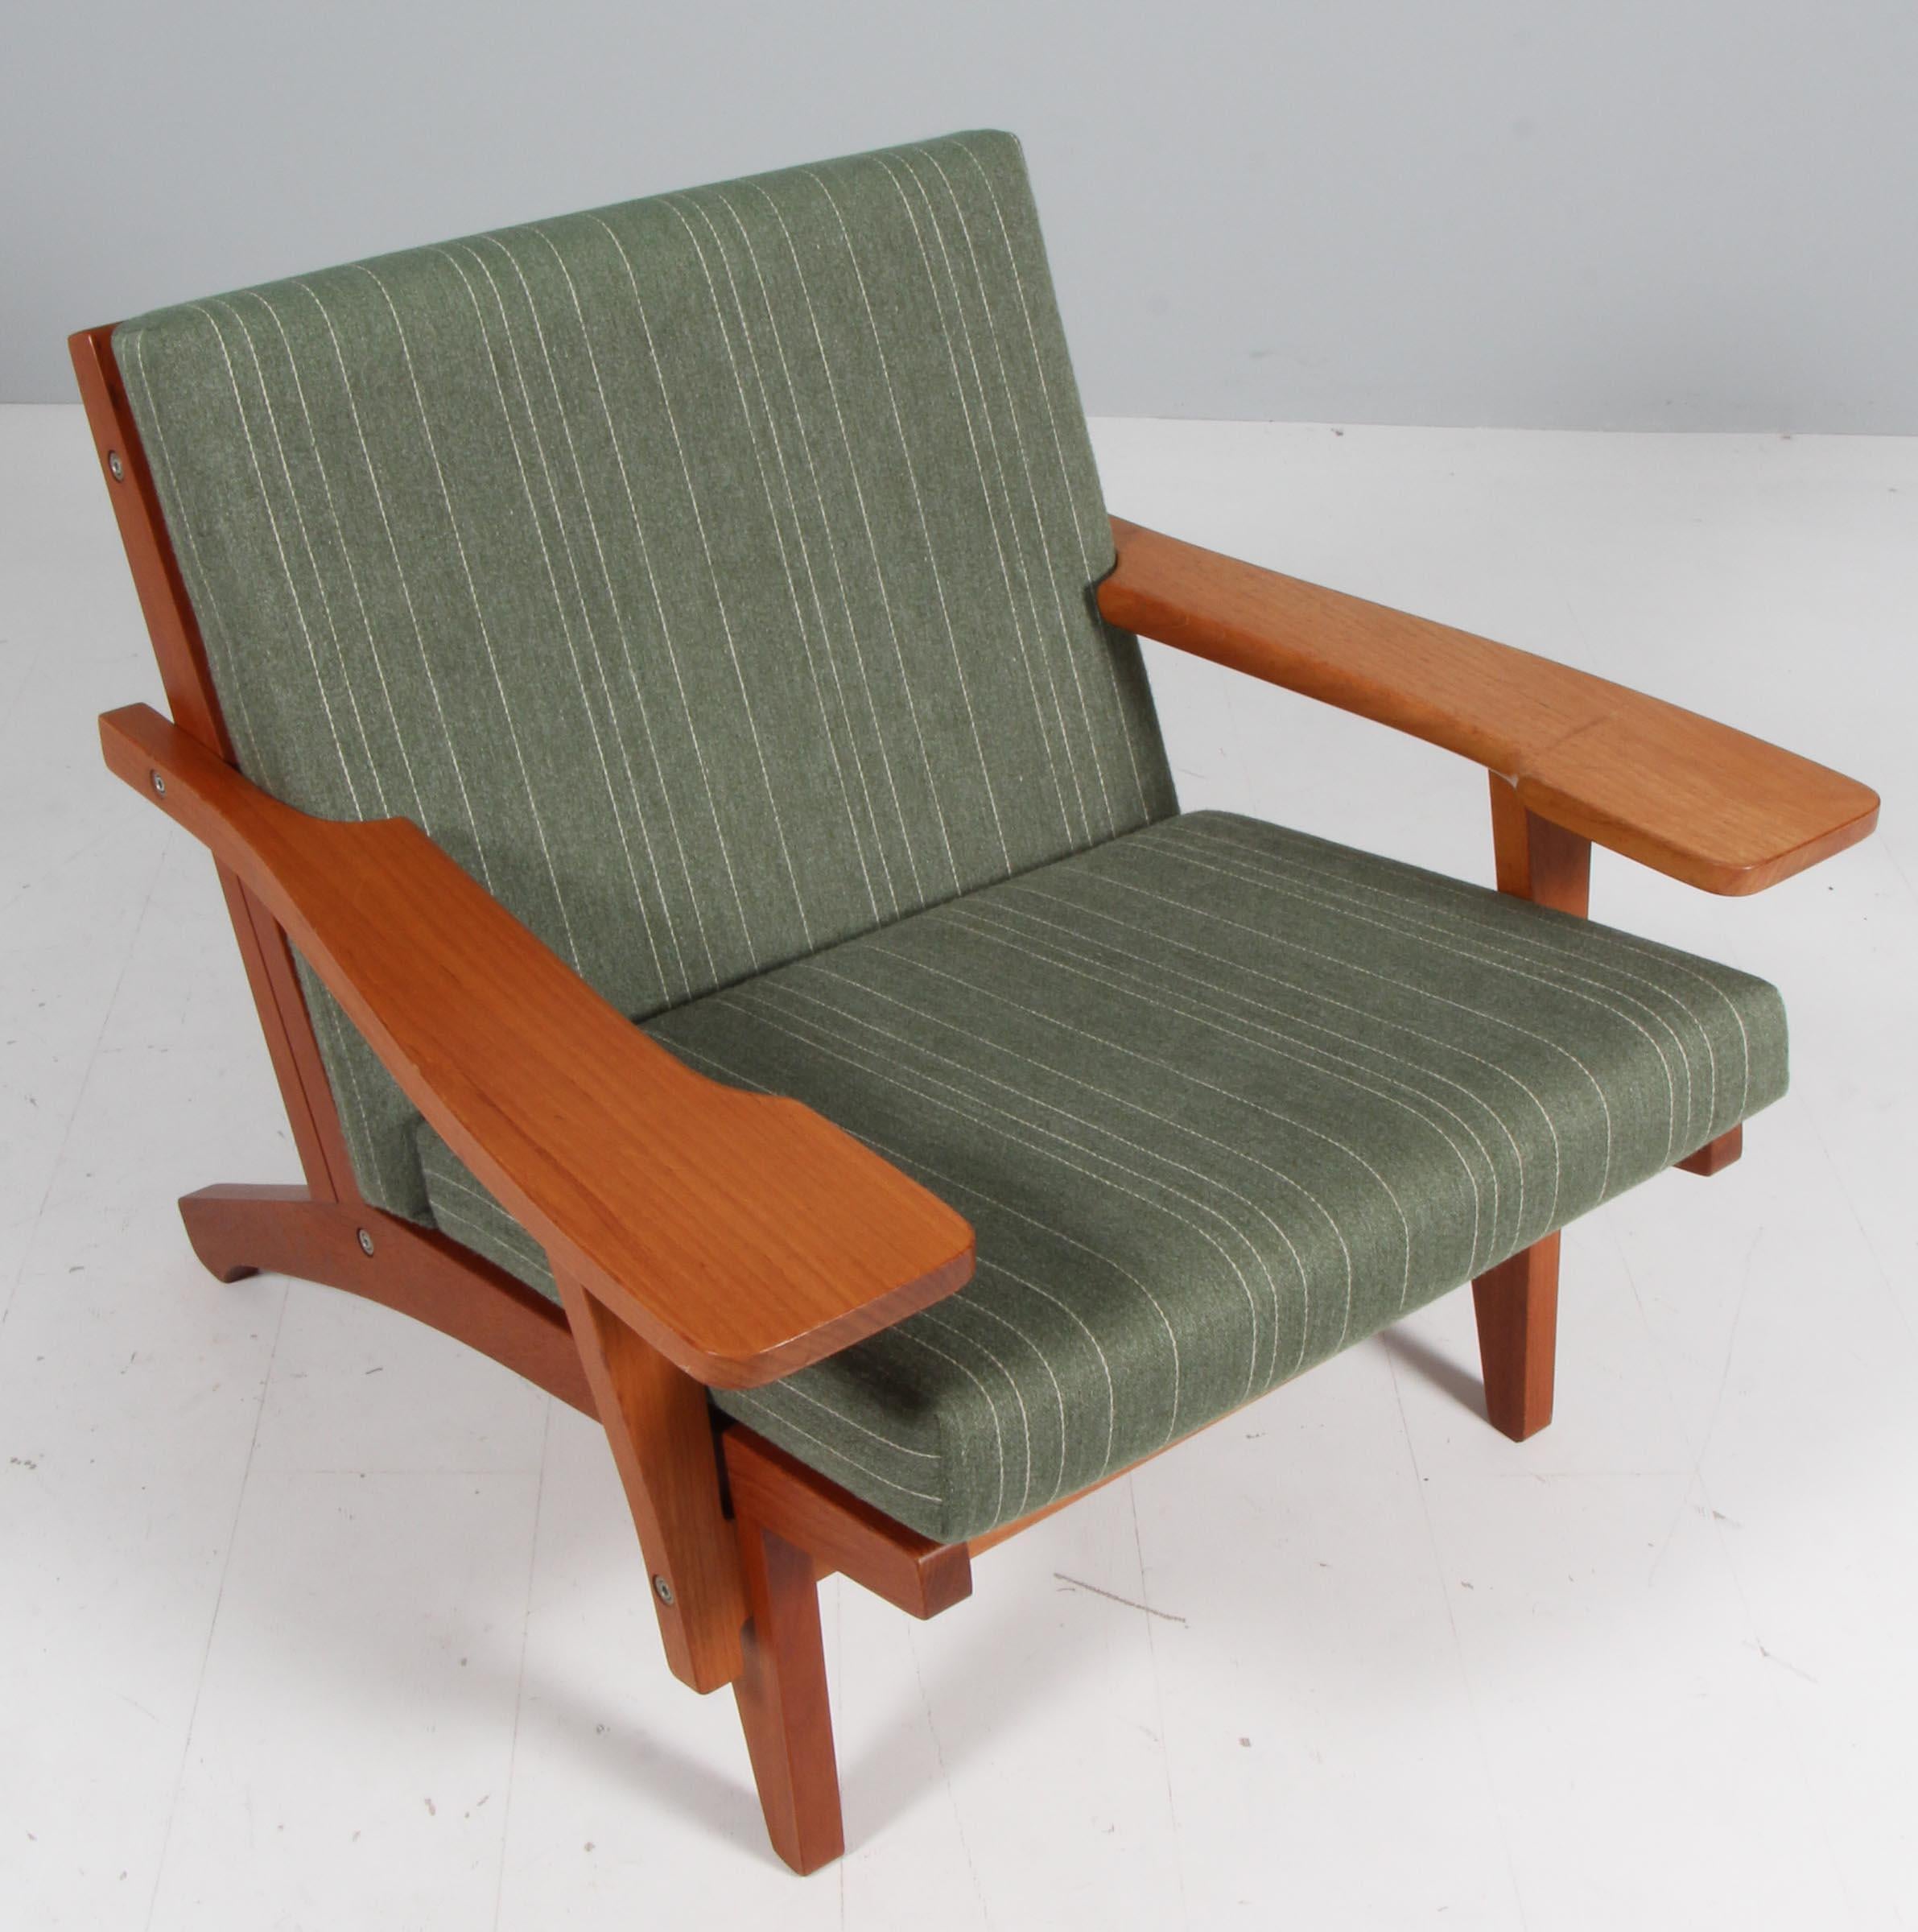 Hans J. Wegner lounge chair with loose cushions upholstered with green savak wool.

Frame of teak. With armrests.

Model GE-370, made by GETAMA.